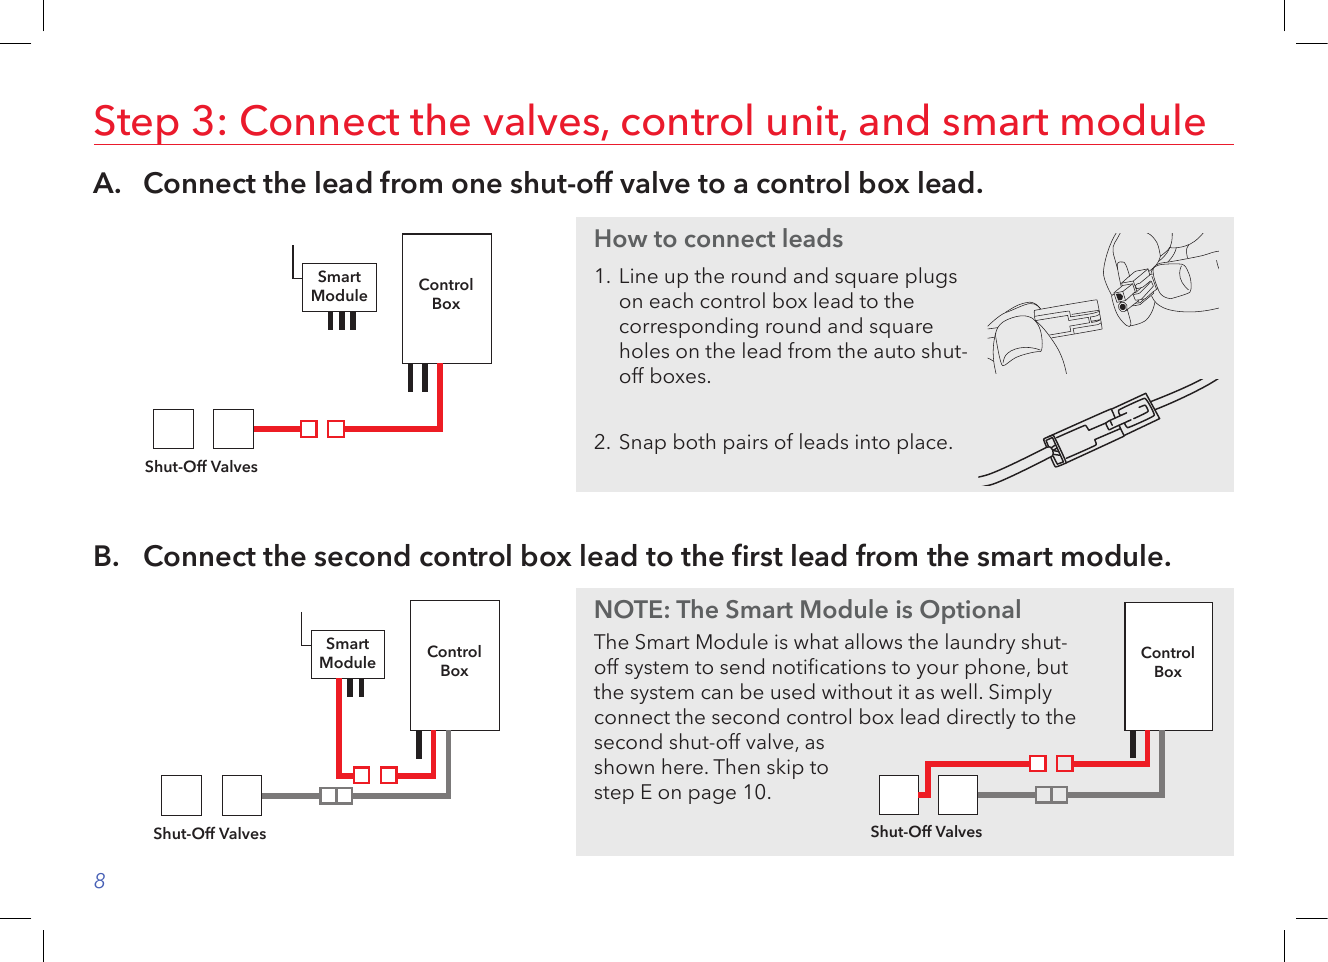 8A.   Connect the lead from one shut-off valve to a control box lead.Step 3: Connect the valves, control unit, and smart moduleControlBoxShut-Off ValvesSmartModuleB.   Connect the second control box lead to the rst lead from the smart module.ControlBoxShut-Off ValvesSmartModuleHow to connect leads1.  Line up the round and square plugs on each control box lead to the corresponding round and square holes on the lead from the auto shut-off boxes. 2.  Snap both pairs of leads into place.NOTE: The Smart Module is OptionalThe Smart Module is what allows the laundry shut-off system to send notications to your phone, but the system can be used without it as well. Simply connect the second control box lead directly to the second shut-off valve, as shown here. Then skip to step E on page 10.ControlBoxShut-Off Valves